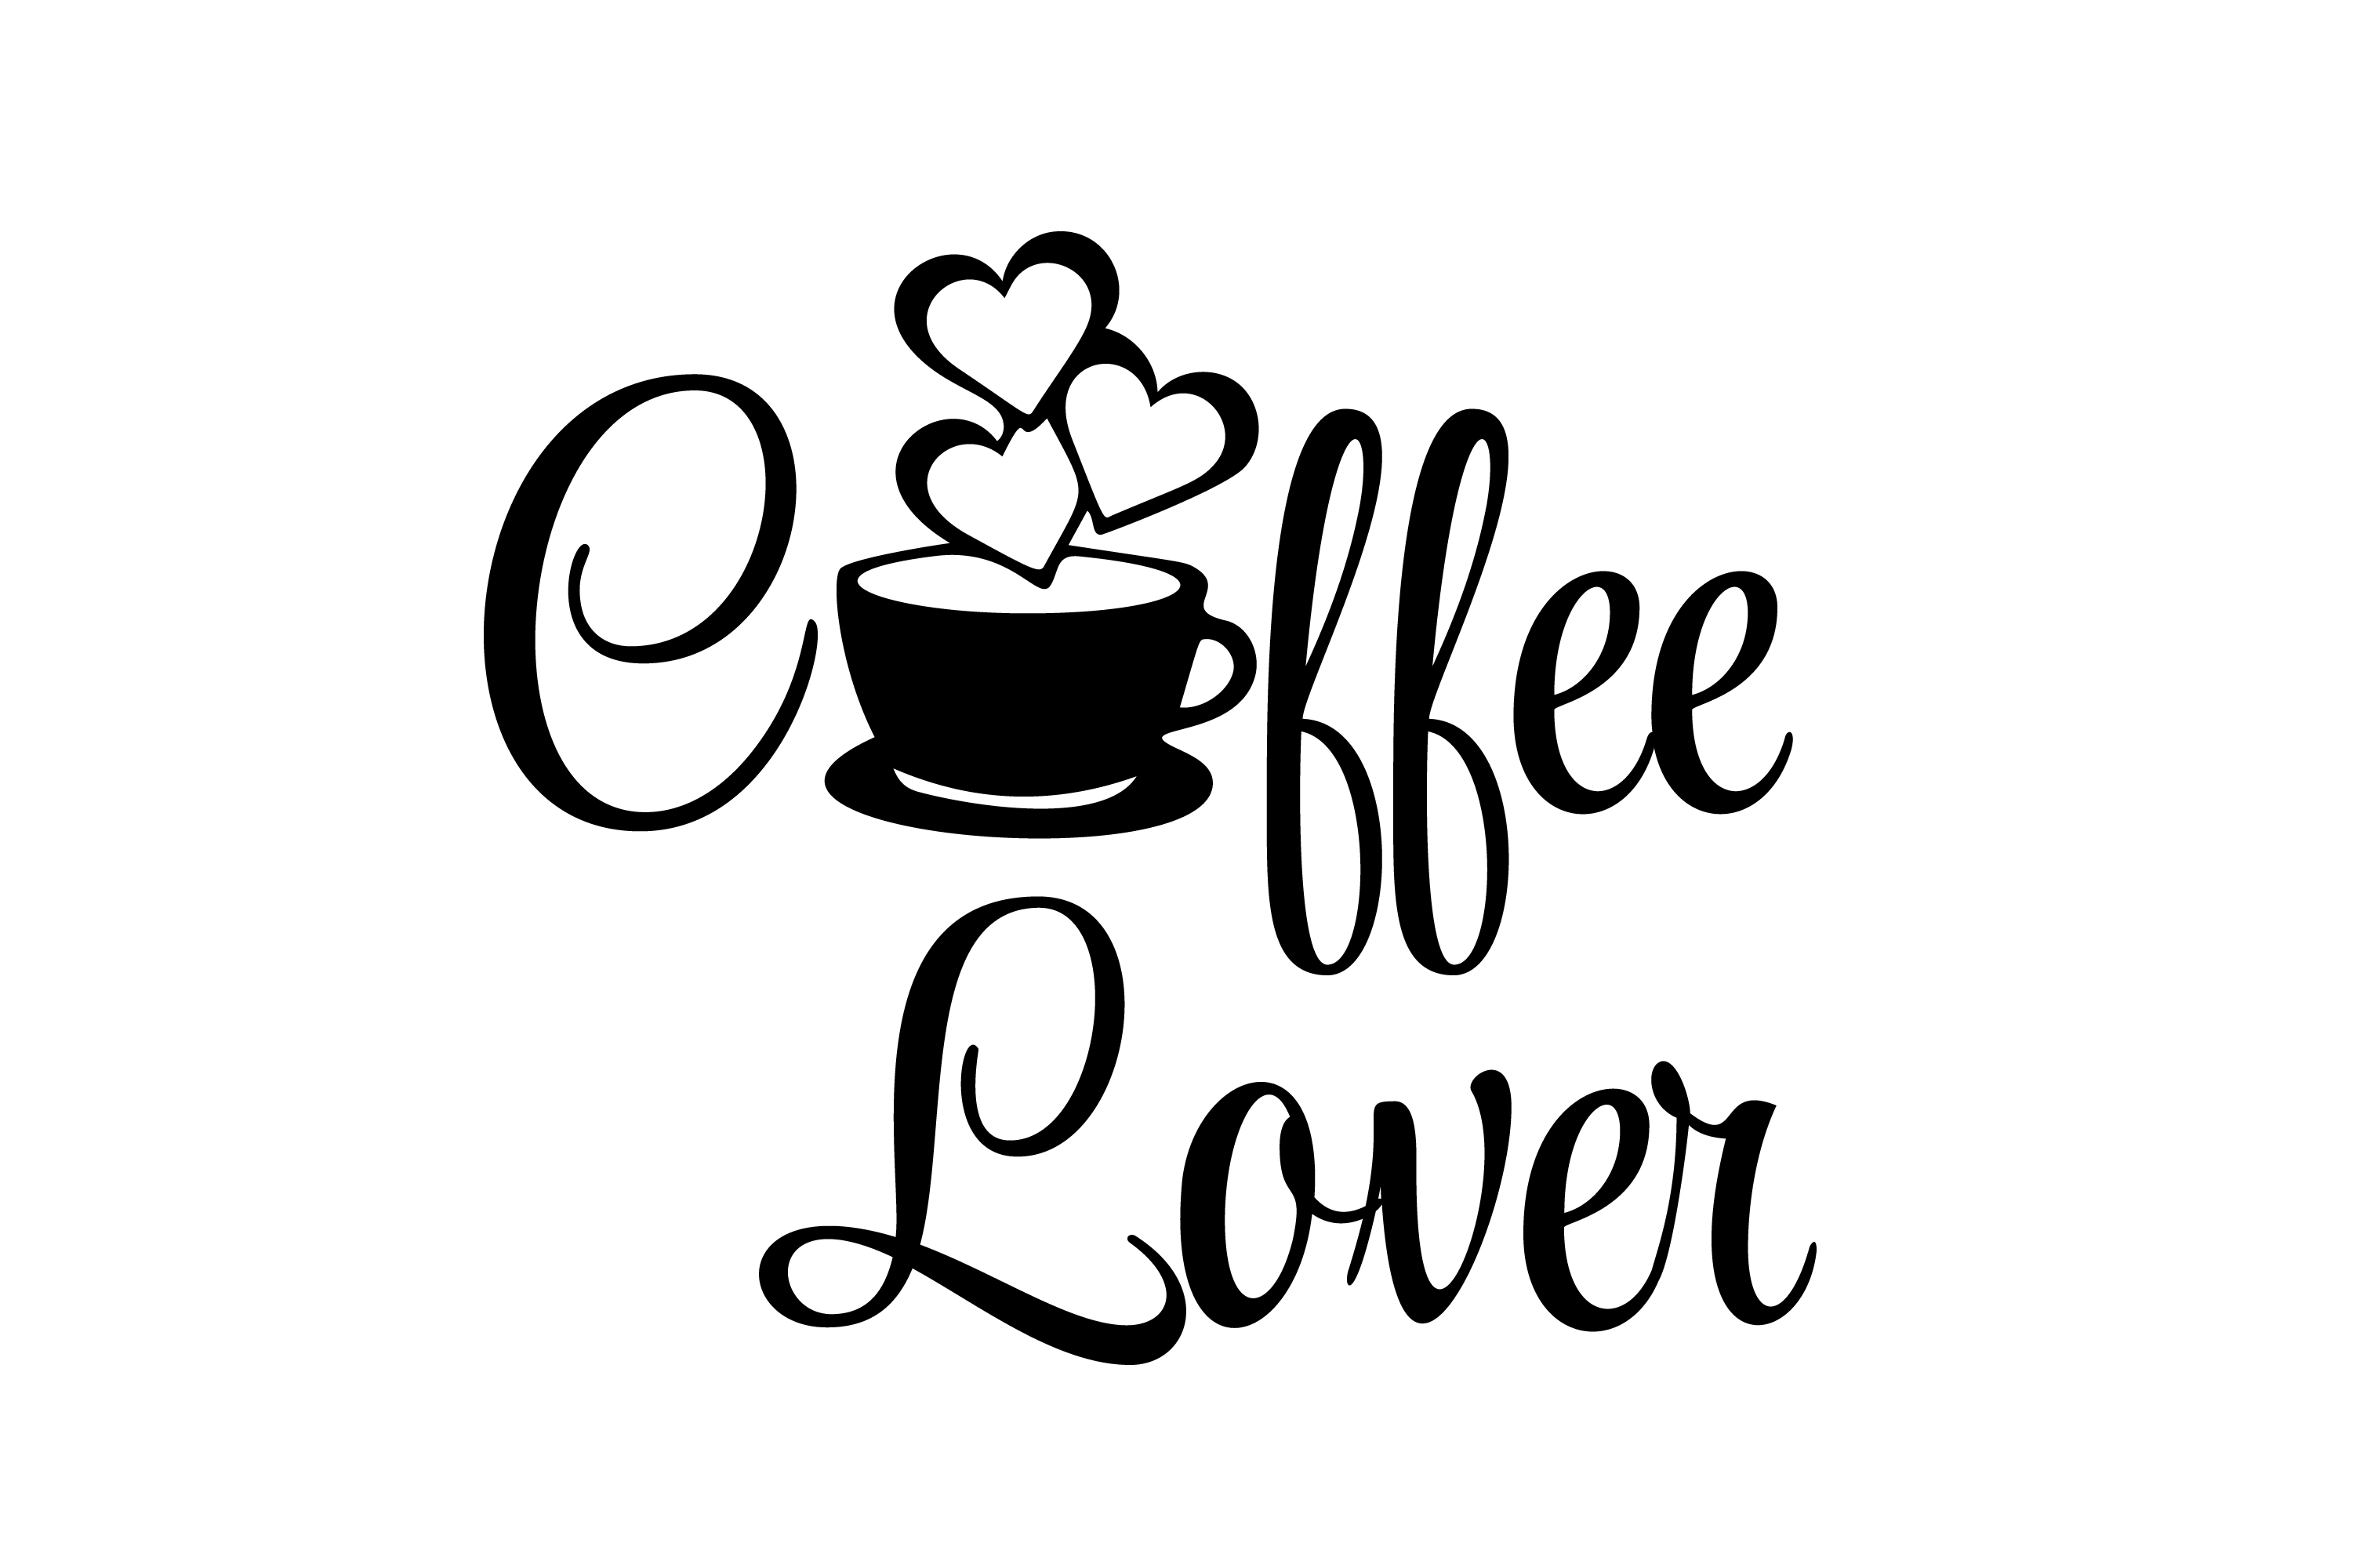 https://www.creativefabrica.com/wp-content/uploads/2020/01/03/Coffee-Lover-Printing-and-Cutting-Files-Graphics-1.png